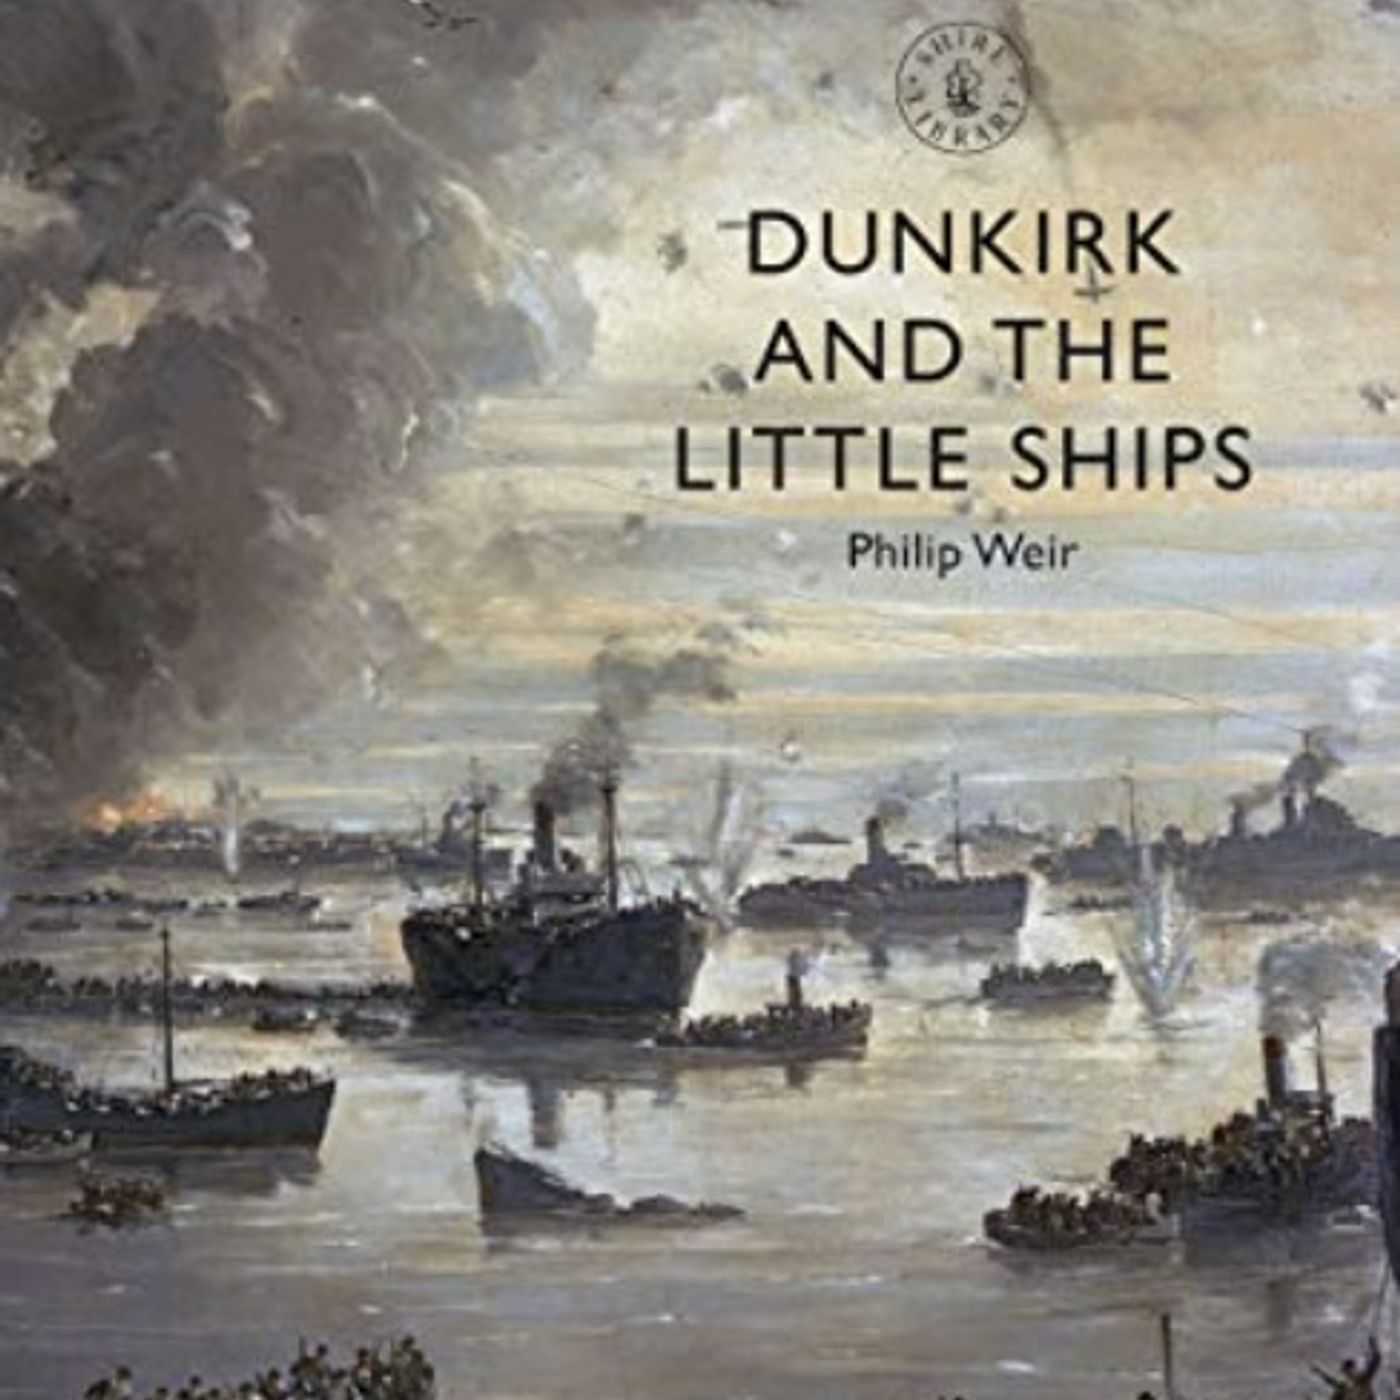 Episode 544: “Dunkirk and the Little Ships